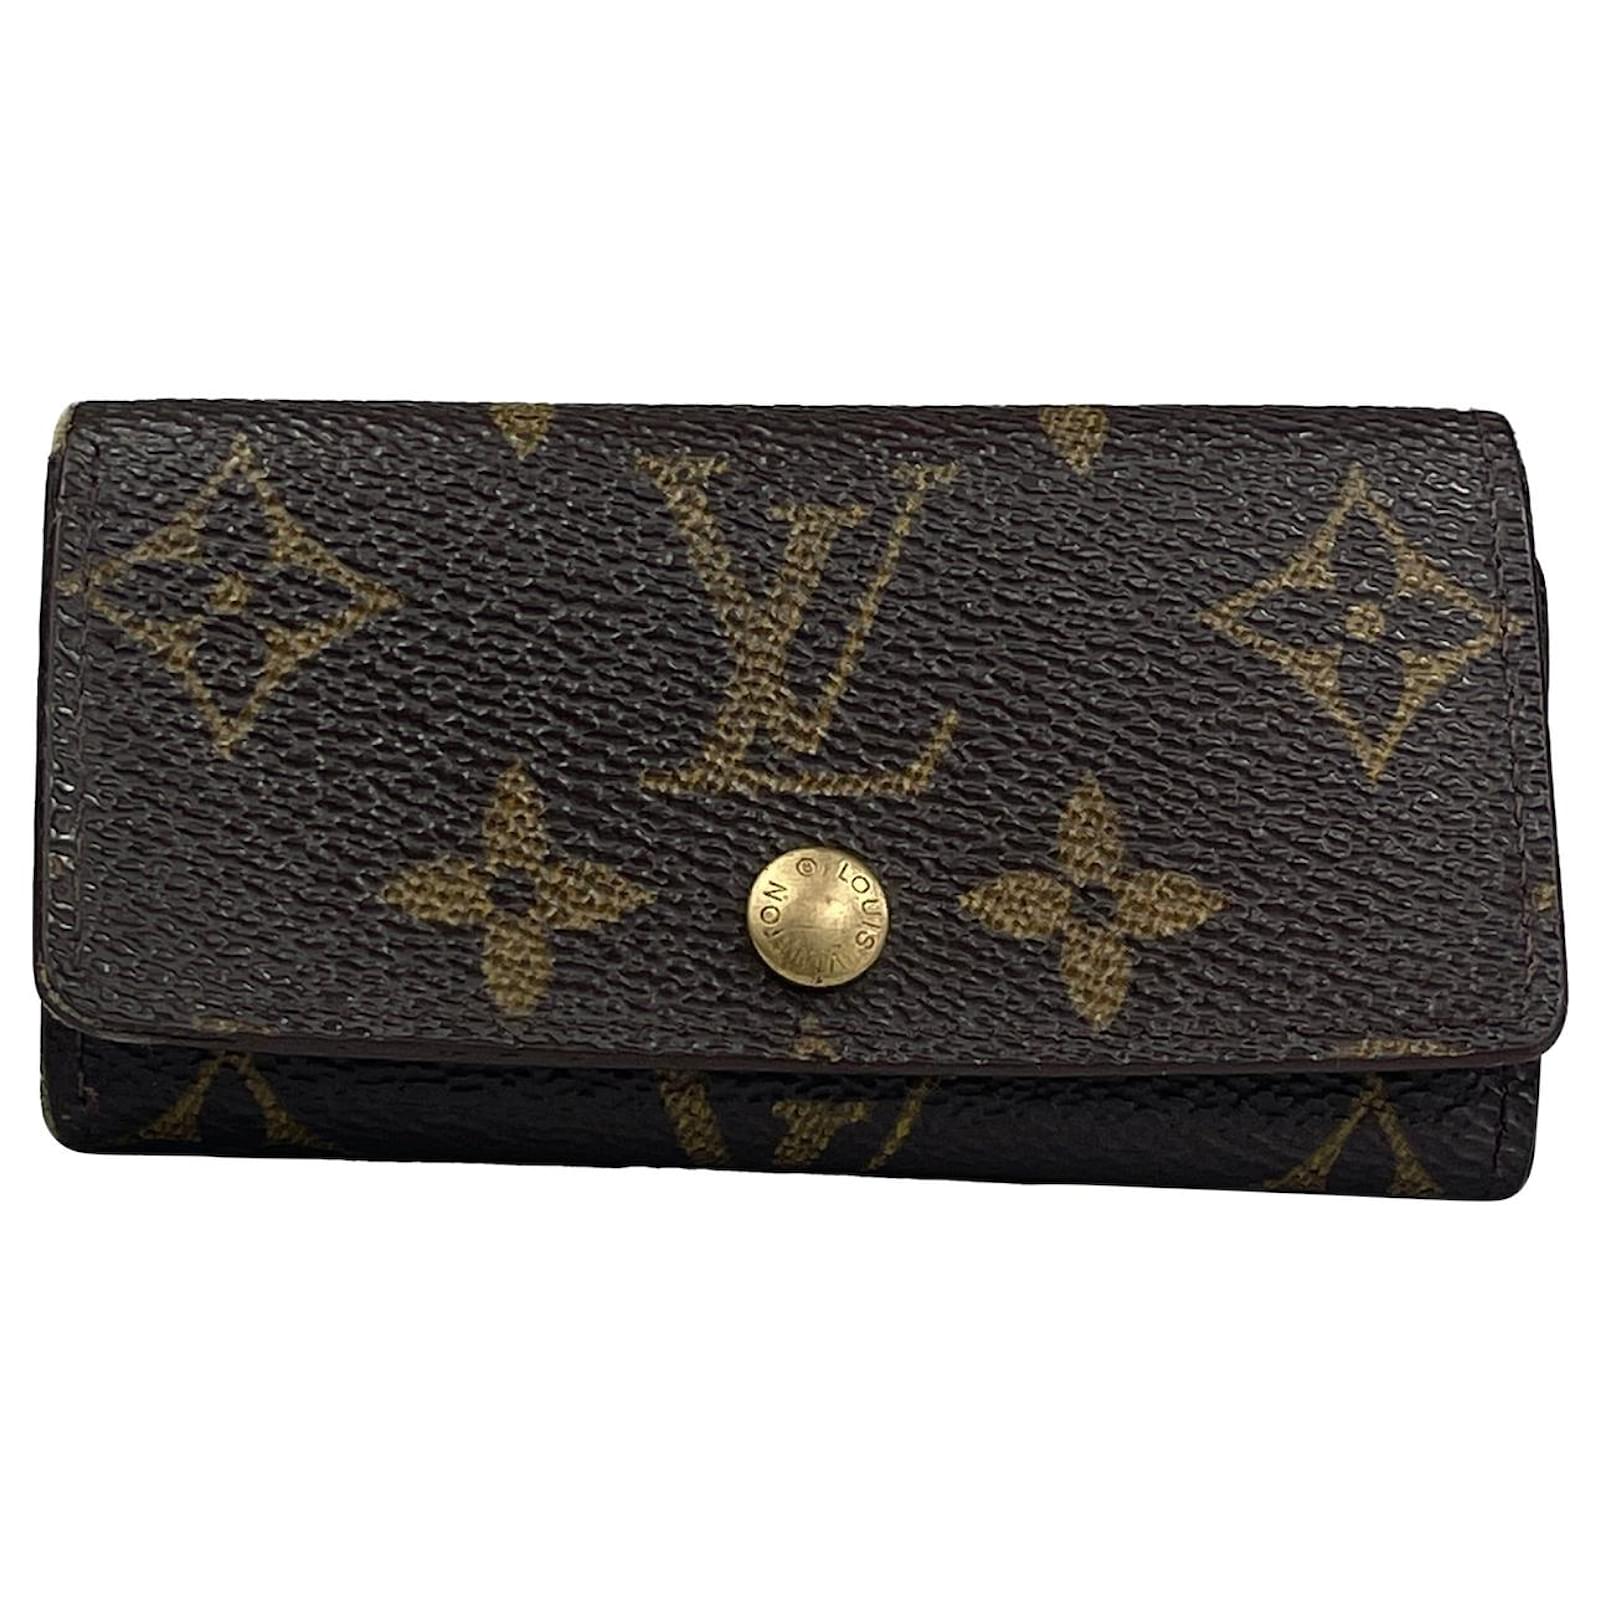 louis vuitton four key pouch in gold monogram vernis leather